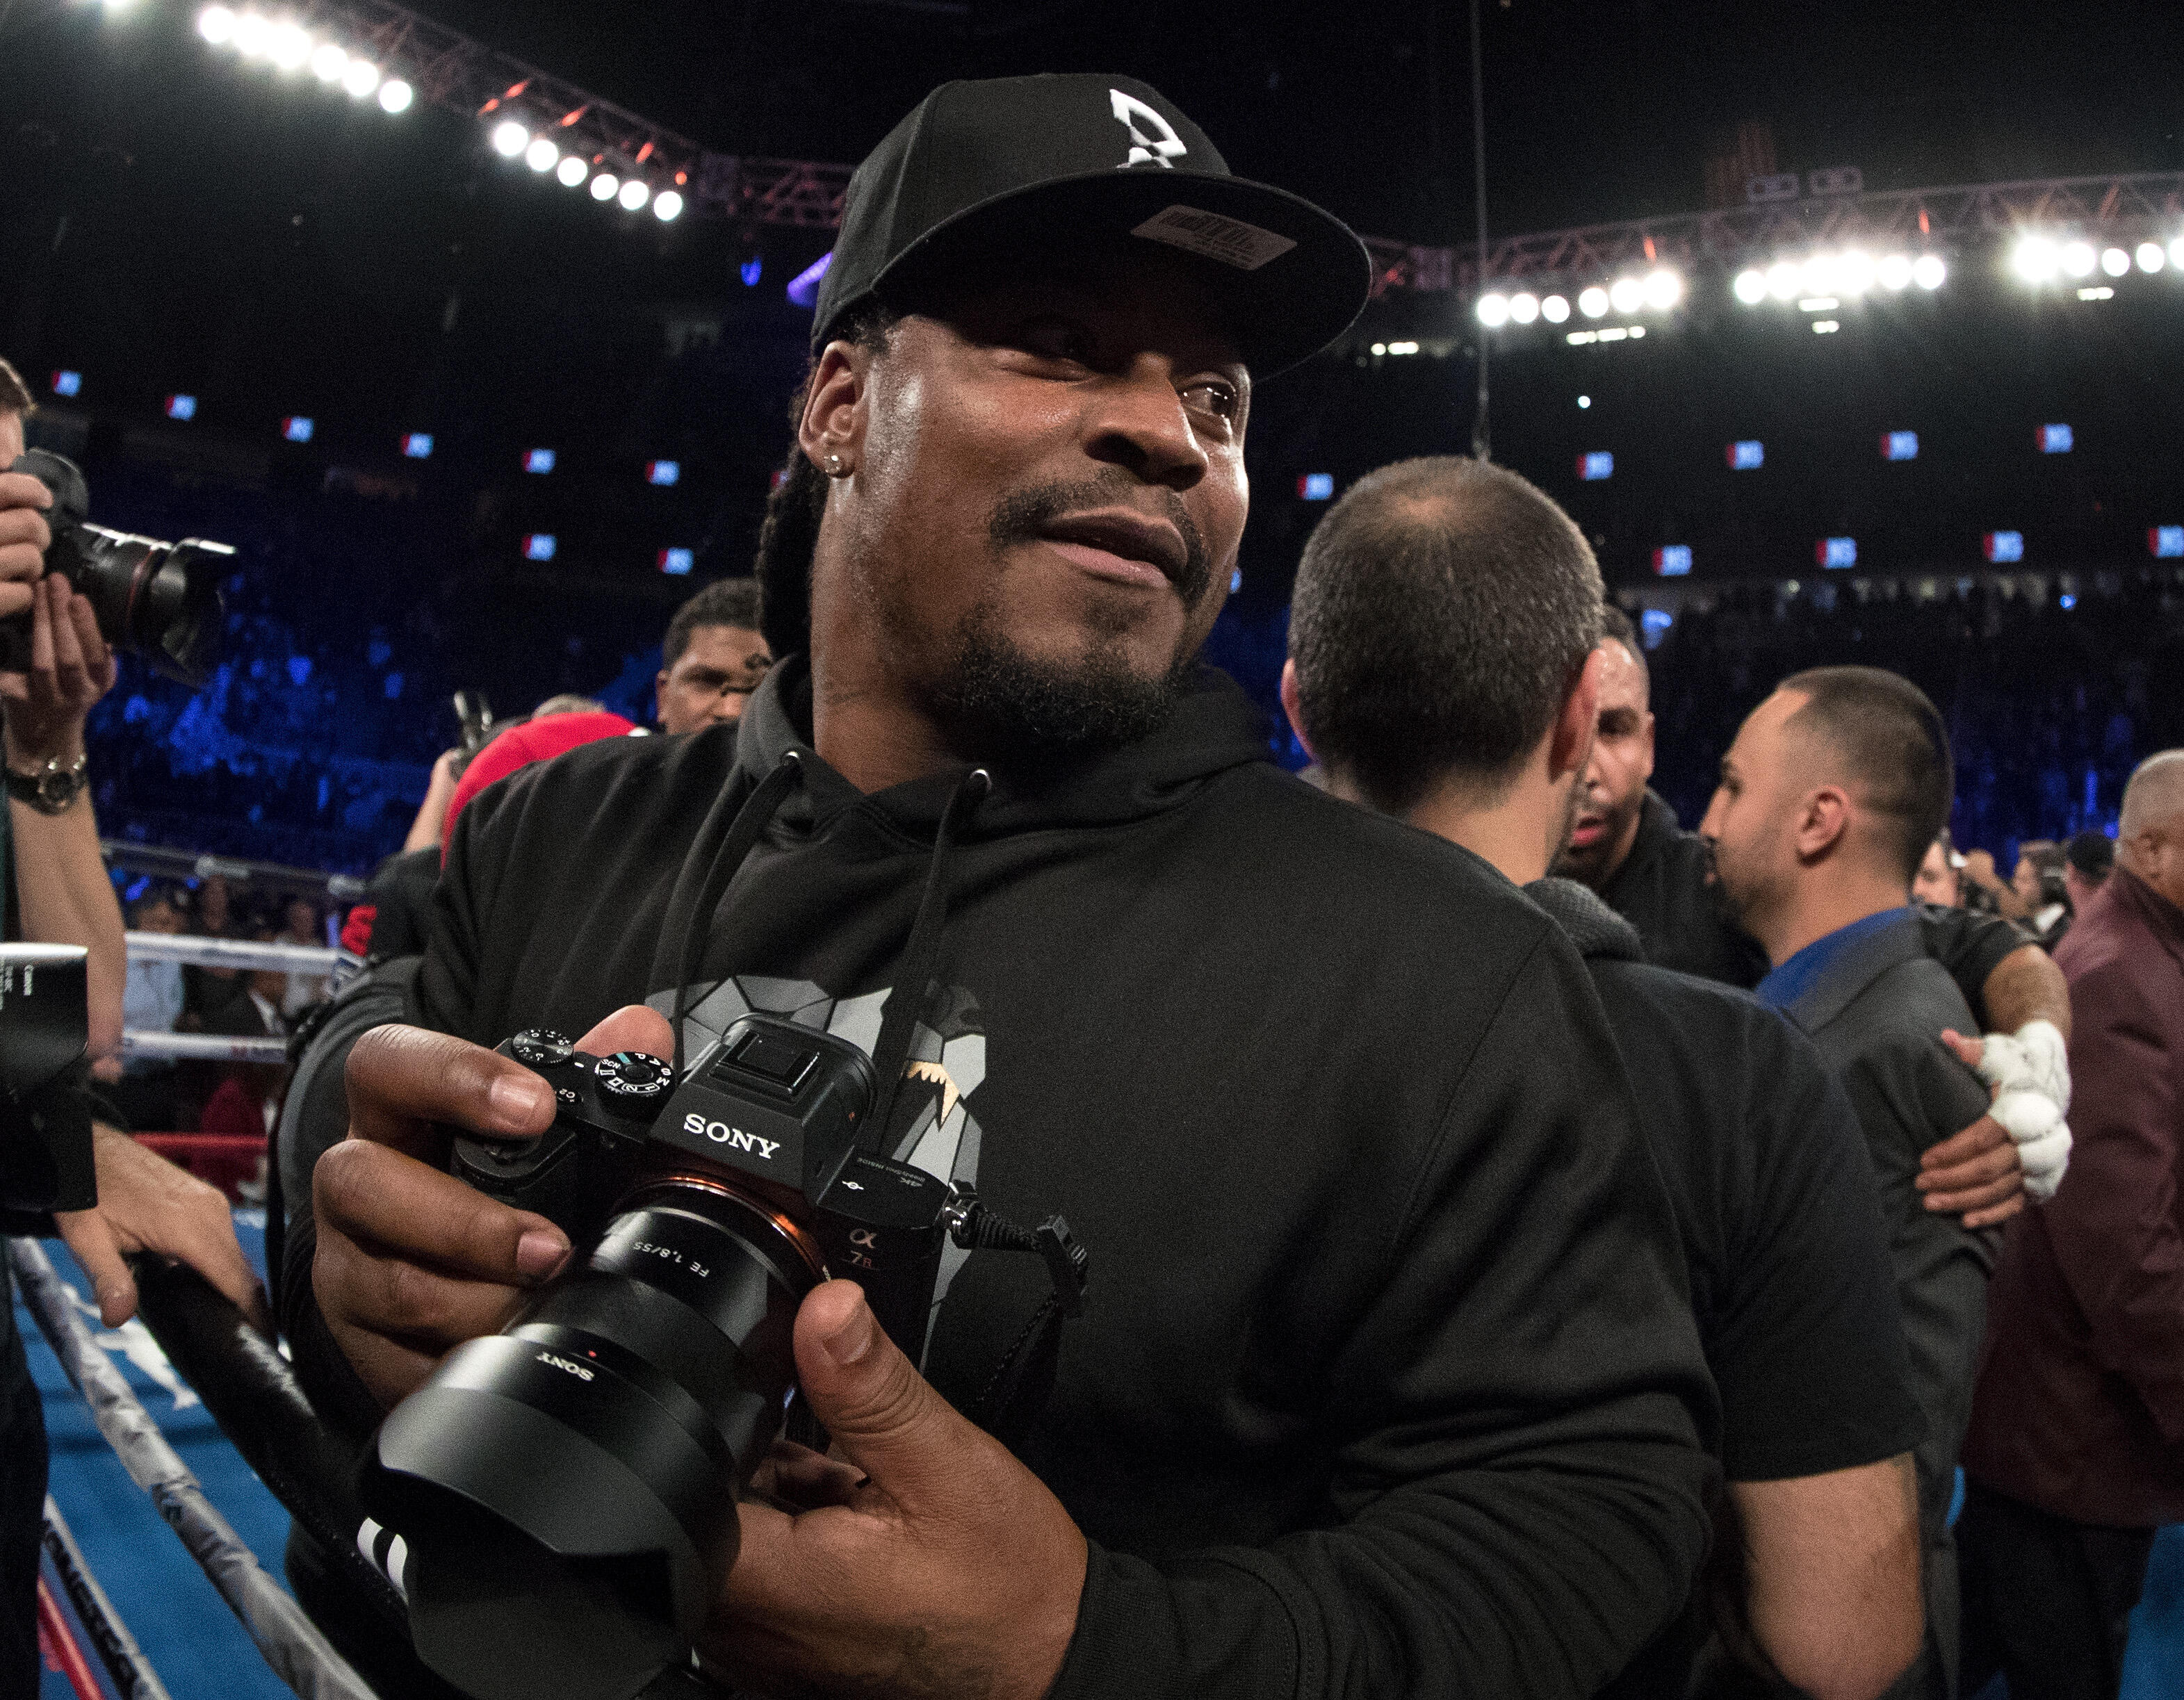 LAS VEGAS, NV - NOVEMBER 19:   Former NFL player Marshawn Lynch is seen in the ring after the the light heavyweight title bout between Andre Ward and Sergey Kovalev of Russia at T-Mobile Arena on November 19, 2016 in Las Vegas, Nevada.  (Photo by Al Bello